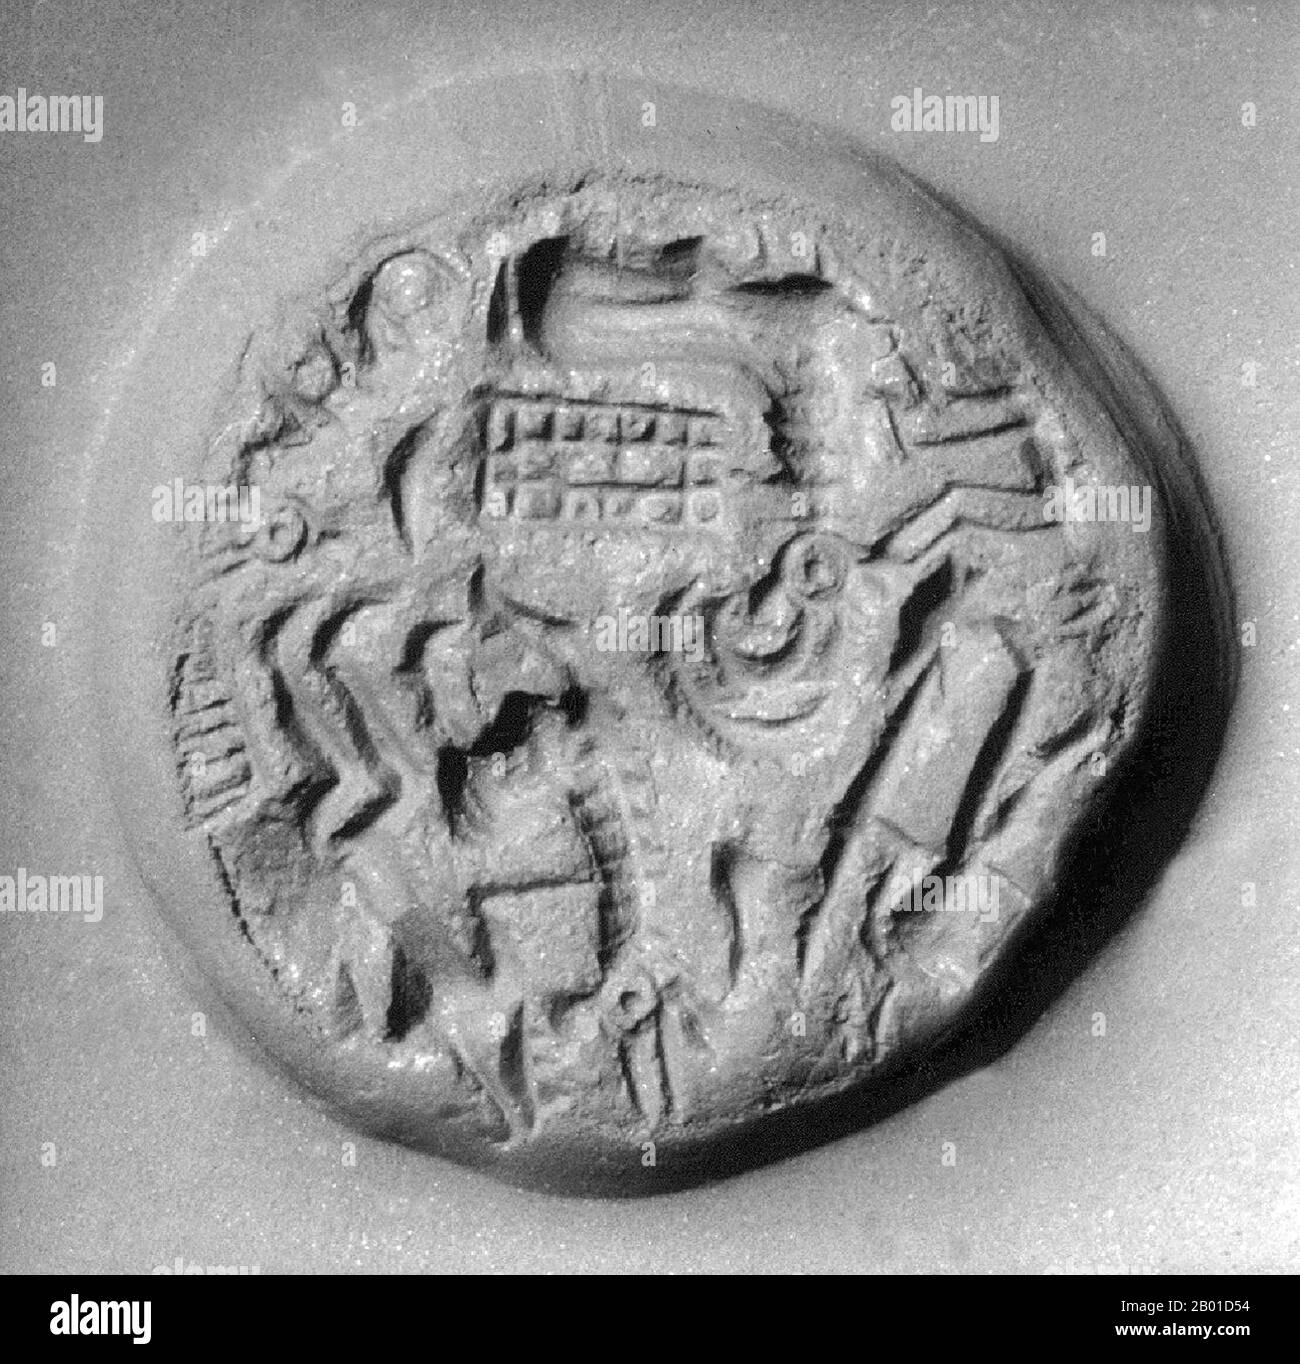 Arabian Gulf: Impression of a stamped seal from the Kingdom of Dilmun, probably on the western shores of the Arabian Gulf, c. 2000 BCE.  Dilmun (sometimes transliterated Telmun) is a land mentioned by Mesopotamian civilisations as a trade partner, a source of the metal copper, and an entrepôt of the Mesopotamia-to-Indus Valley Civilisation trade route.  Although the exact location of Dilmun is unclear, it might be associated with the islands of Bahrain, the Eastern Province of Saudi Arabia, Qatar, the United Arab Emirates, Oman and the nearby Iranian coast of the Arab or Persian Gulf. Stock Photo